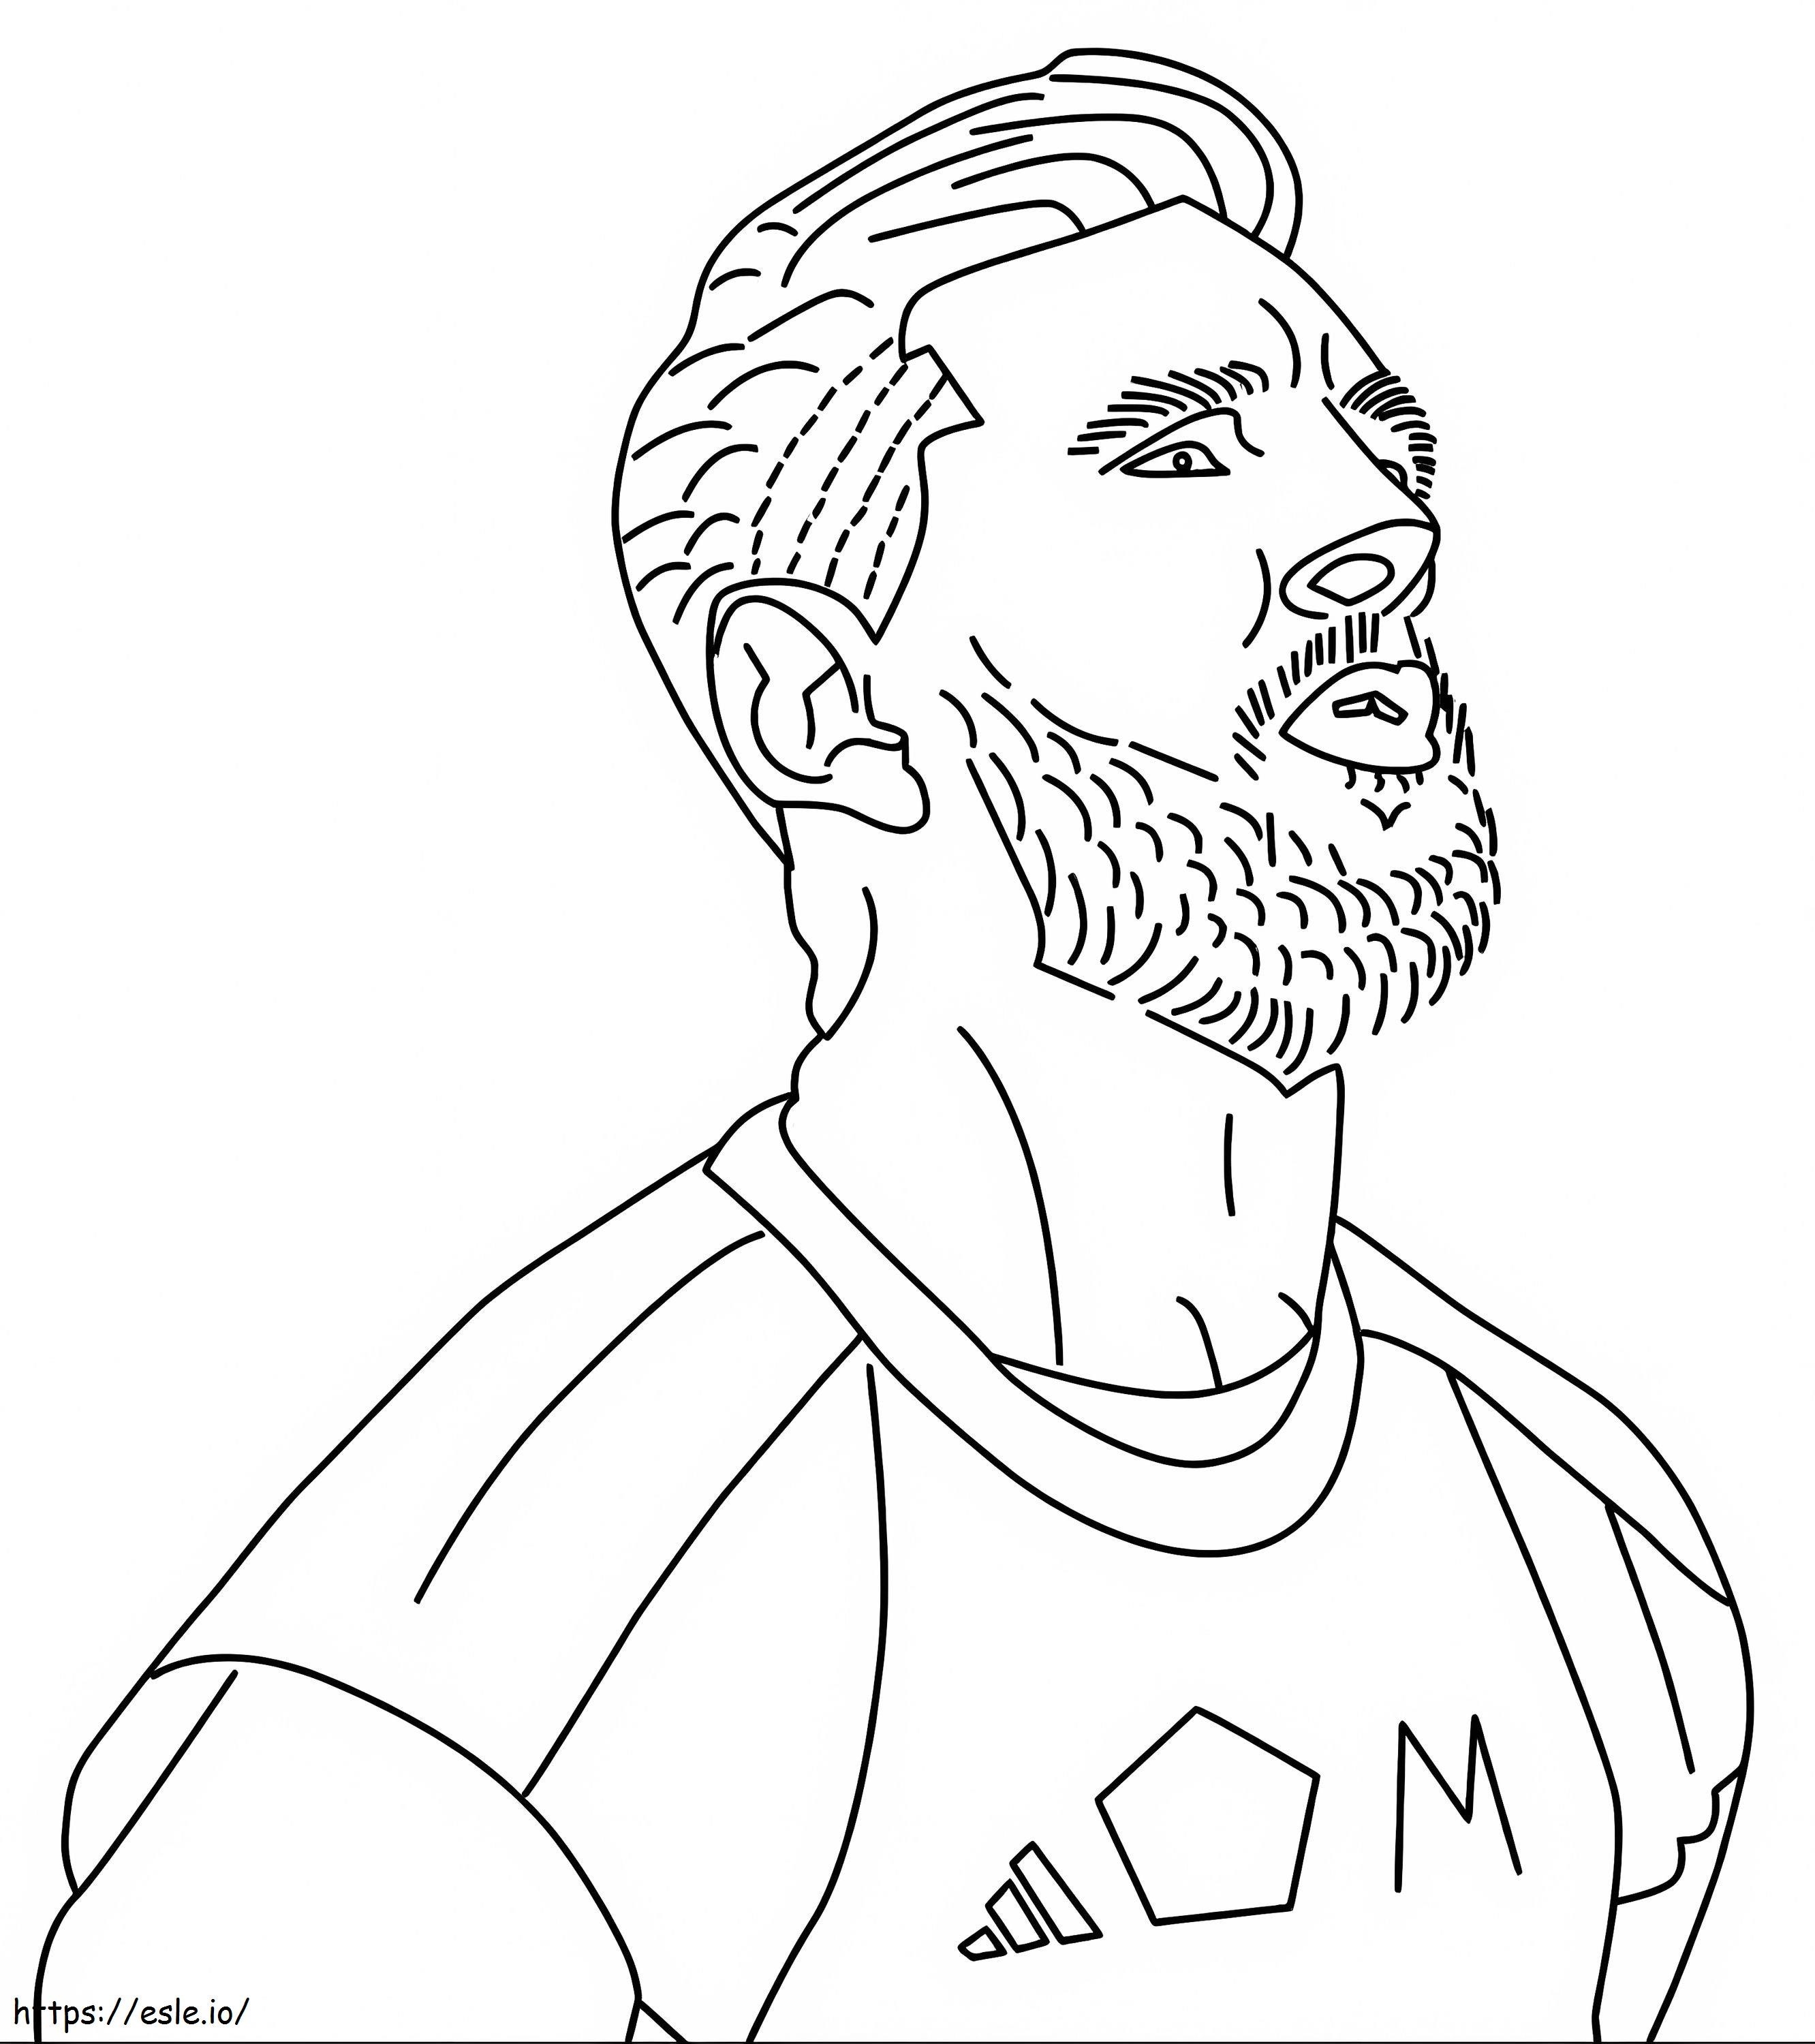 Lnel messis face coloring page